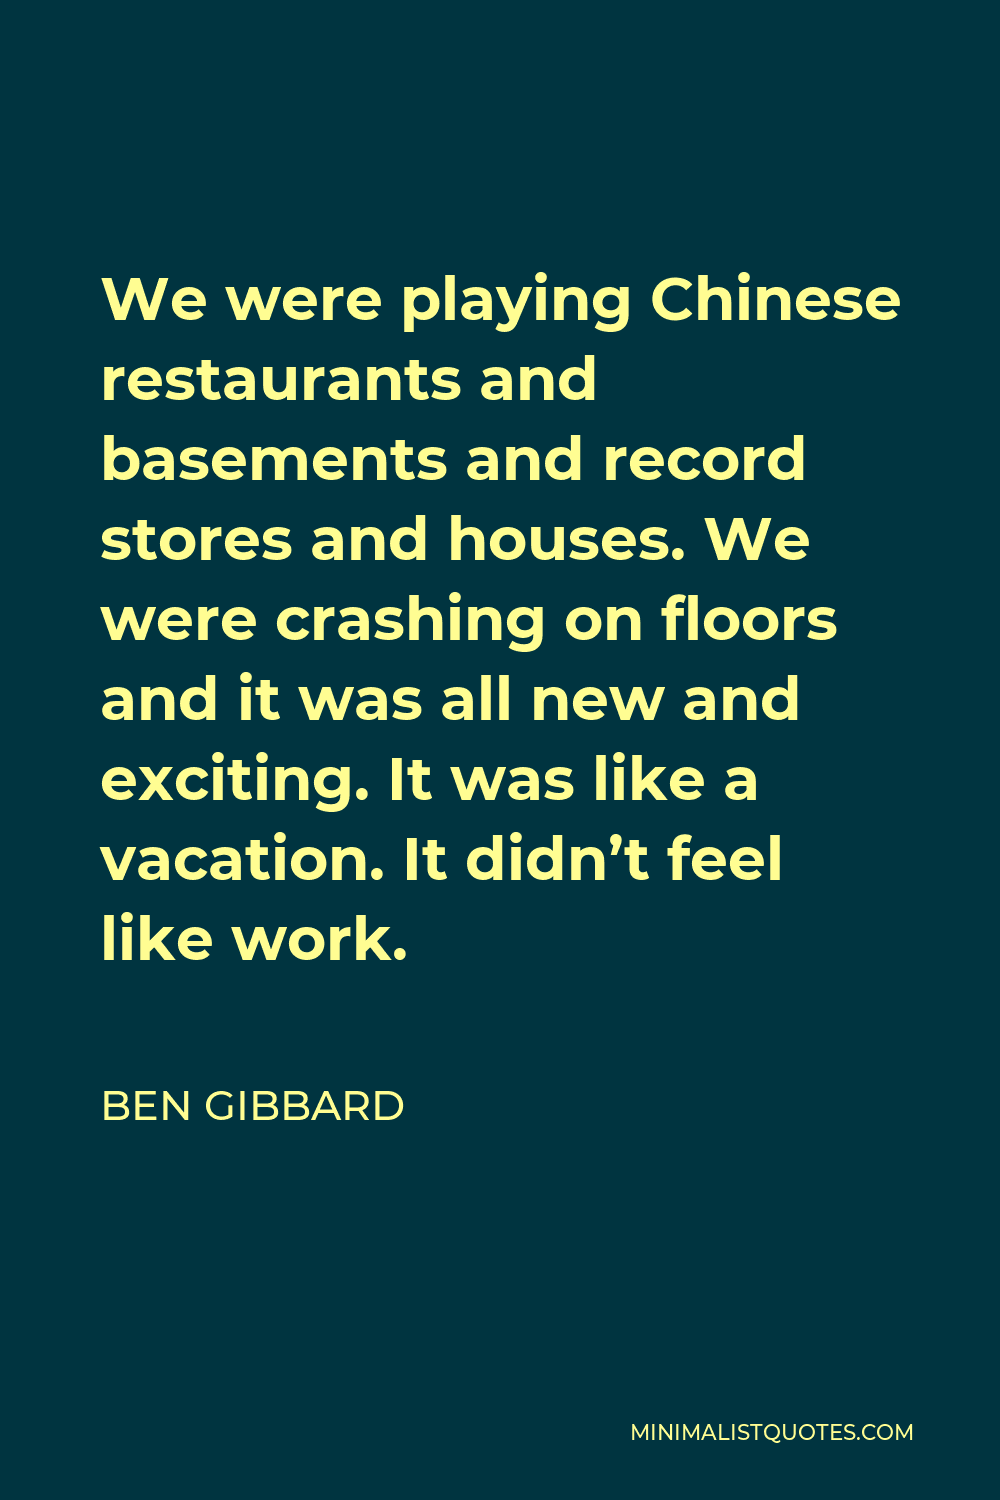 Ben Gibbard Quote - We were playing Chinese restaurants and basements and record stores and houses. We were crashing on floors and it was all new and exciting. It was like a vacation. It didn’t feel like work.